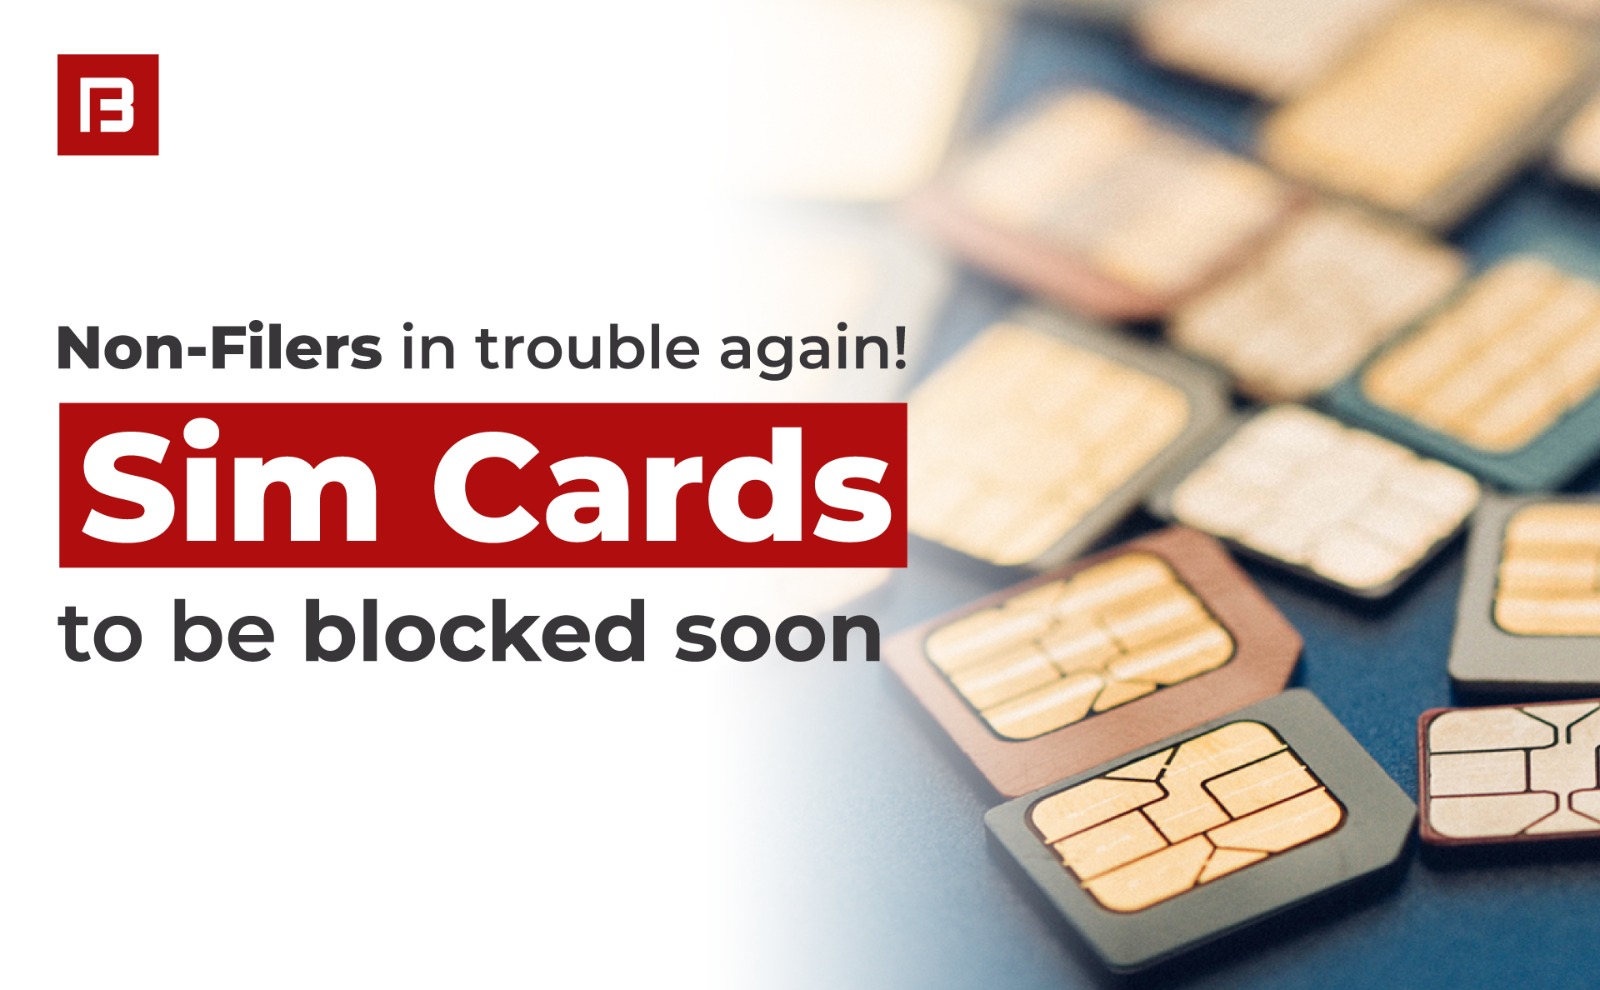 Sim cards of Non-Filers will be blocked soon after eid by FBR